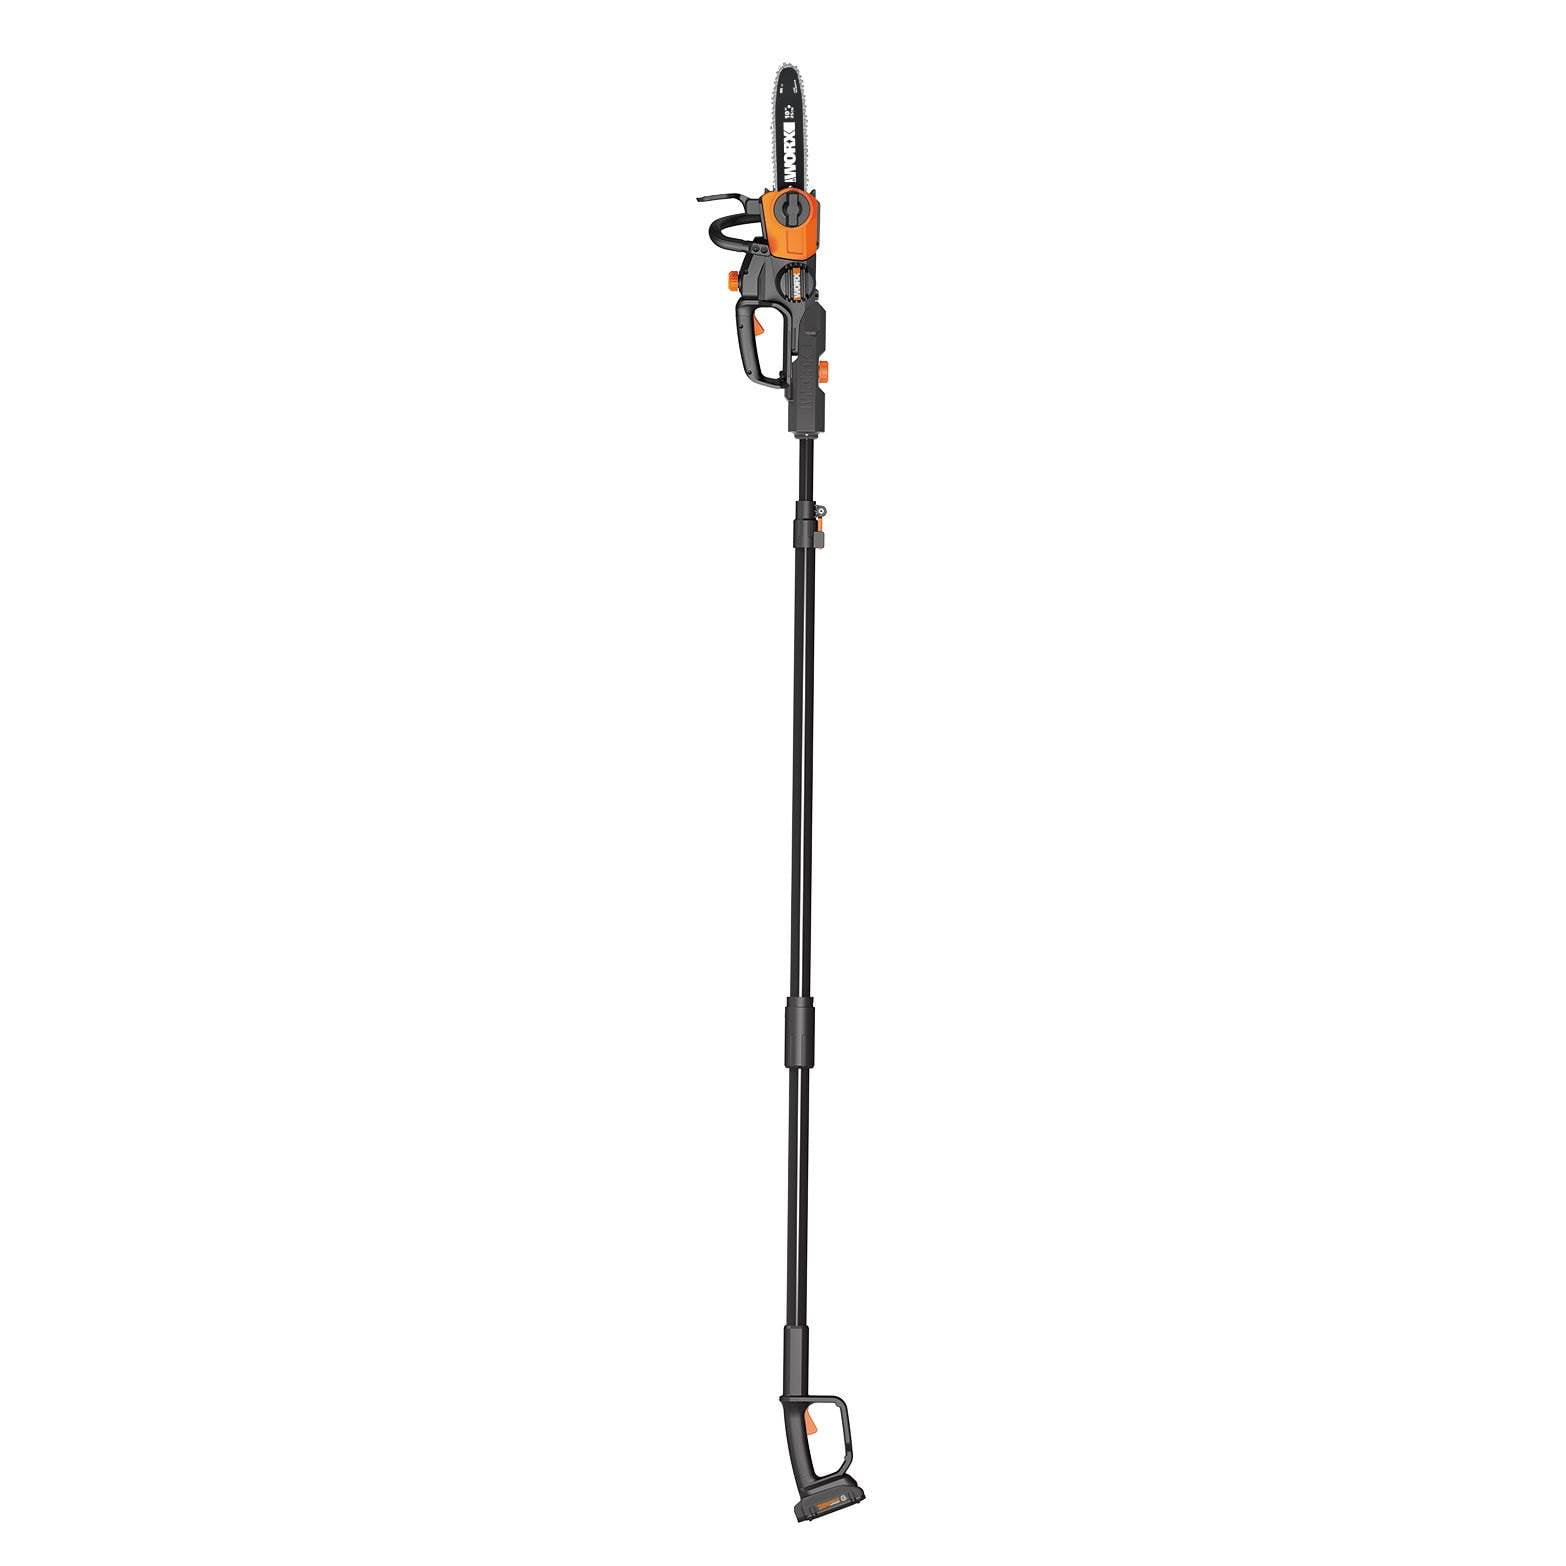 20V 10 Cordless Pole/Chain Saw with Auto-Tension